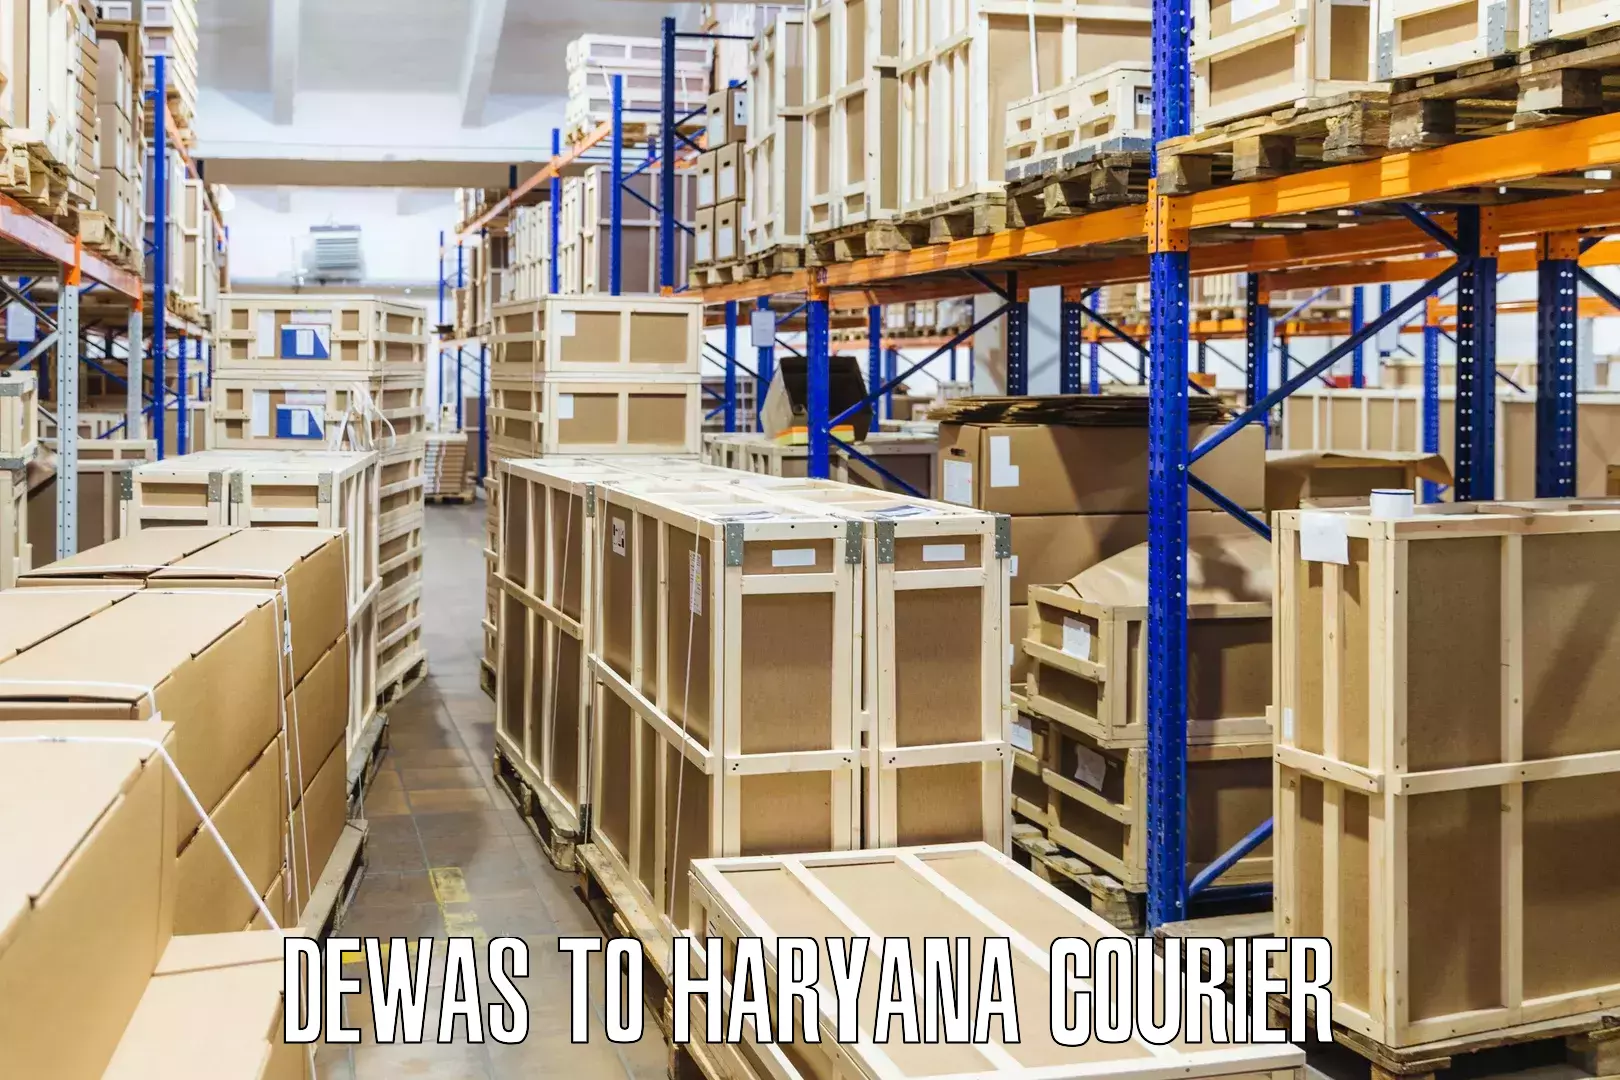 Quality courier partnerships Dewas to NCR Haryana